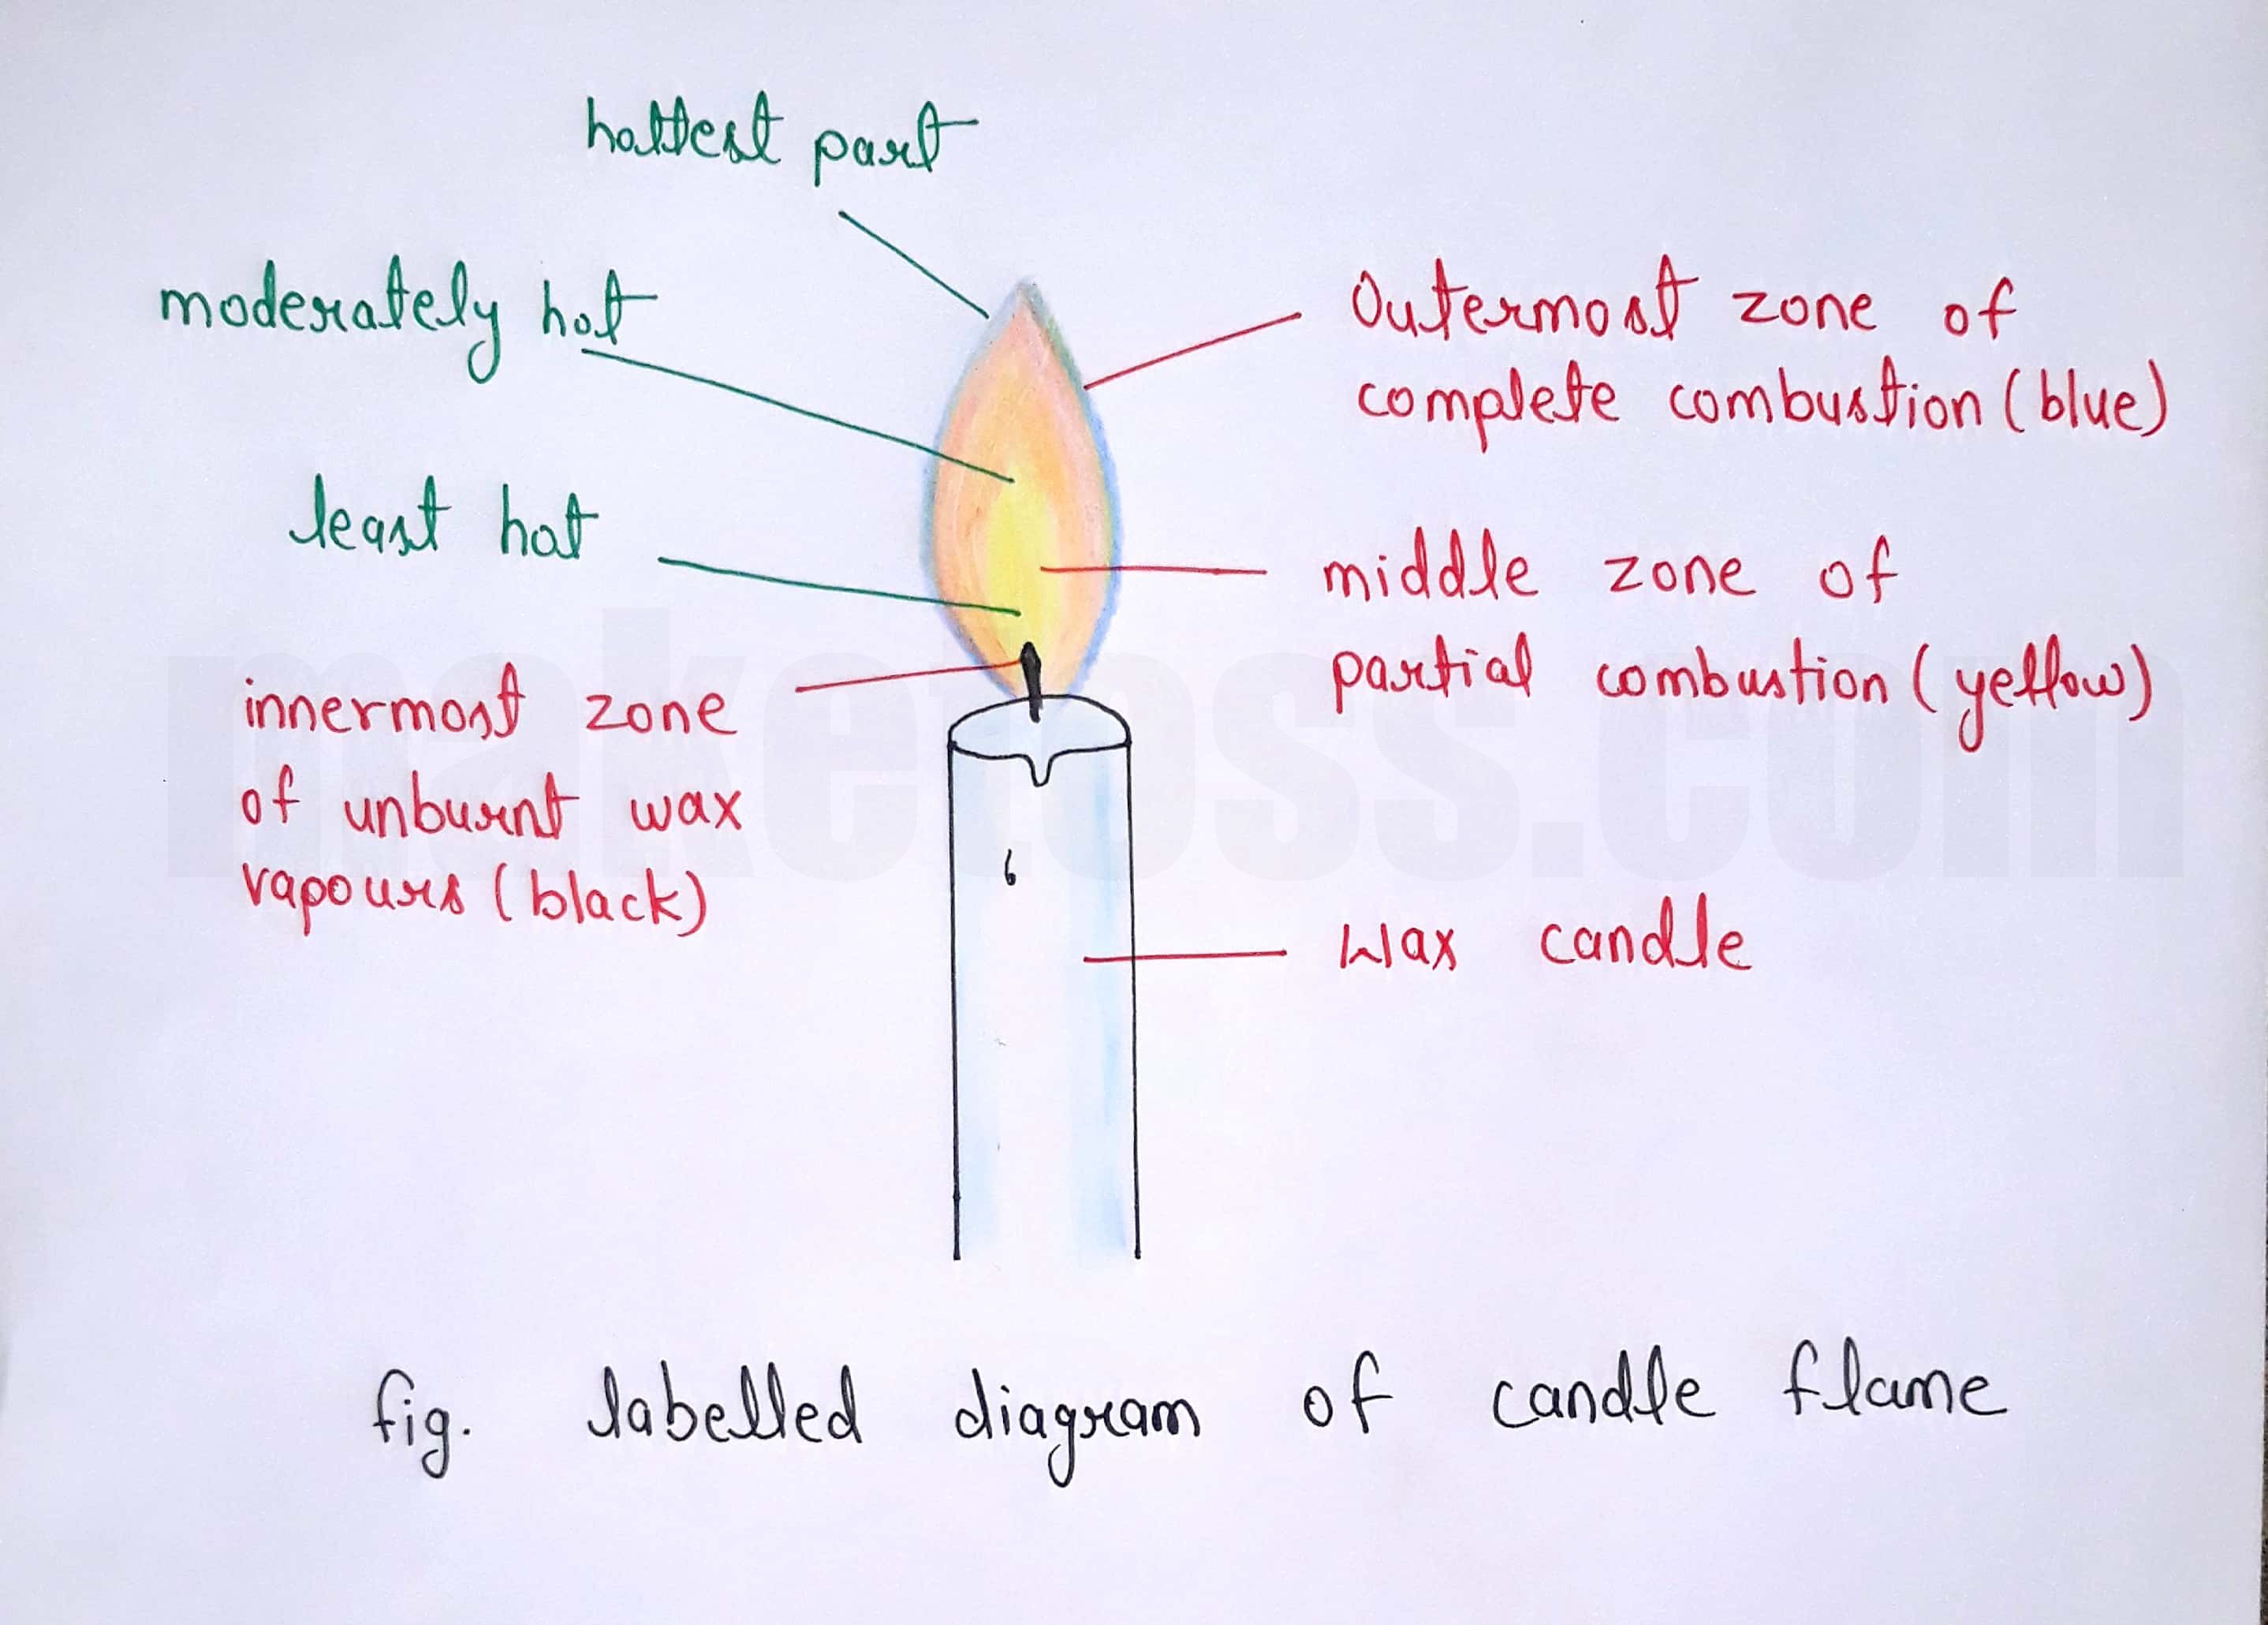 Q 6 answer - Labelled diagram of candle flame 